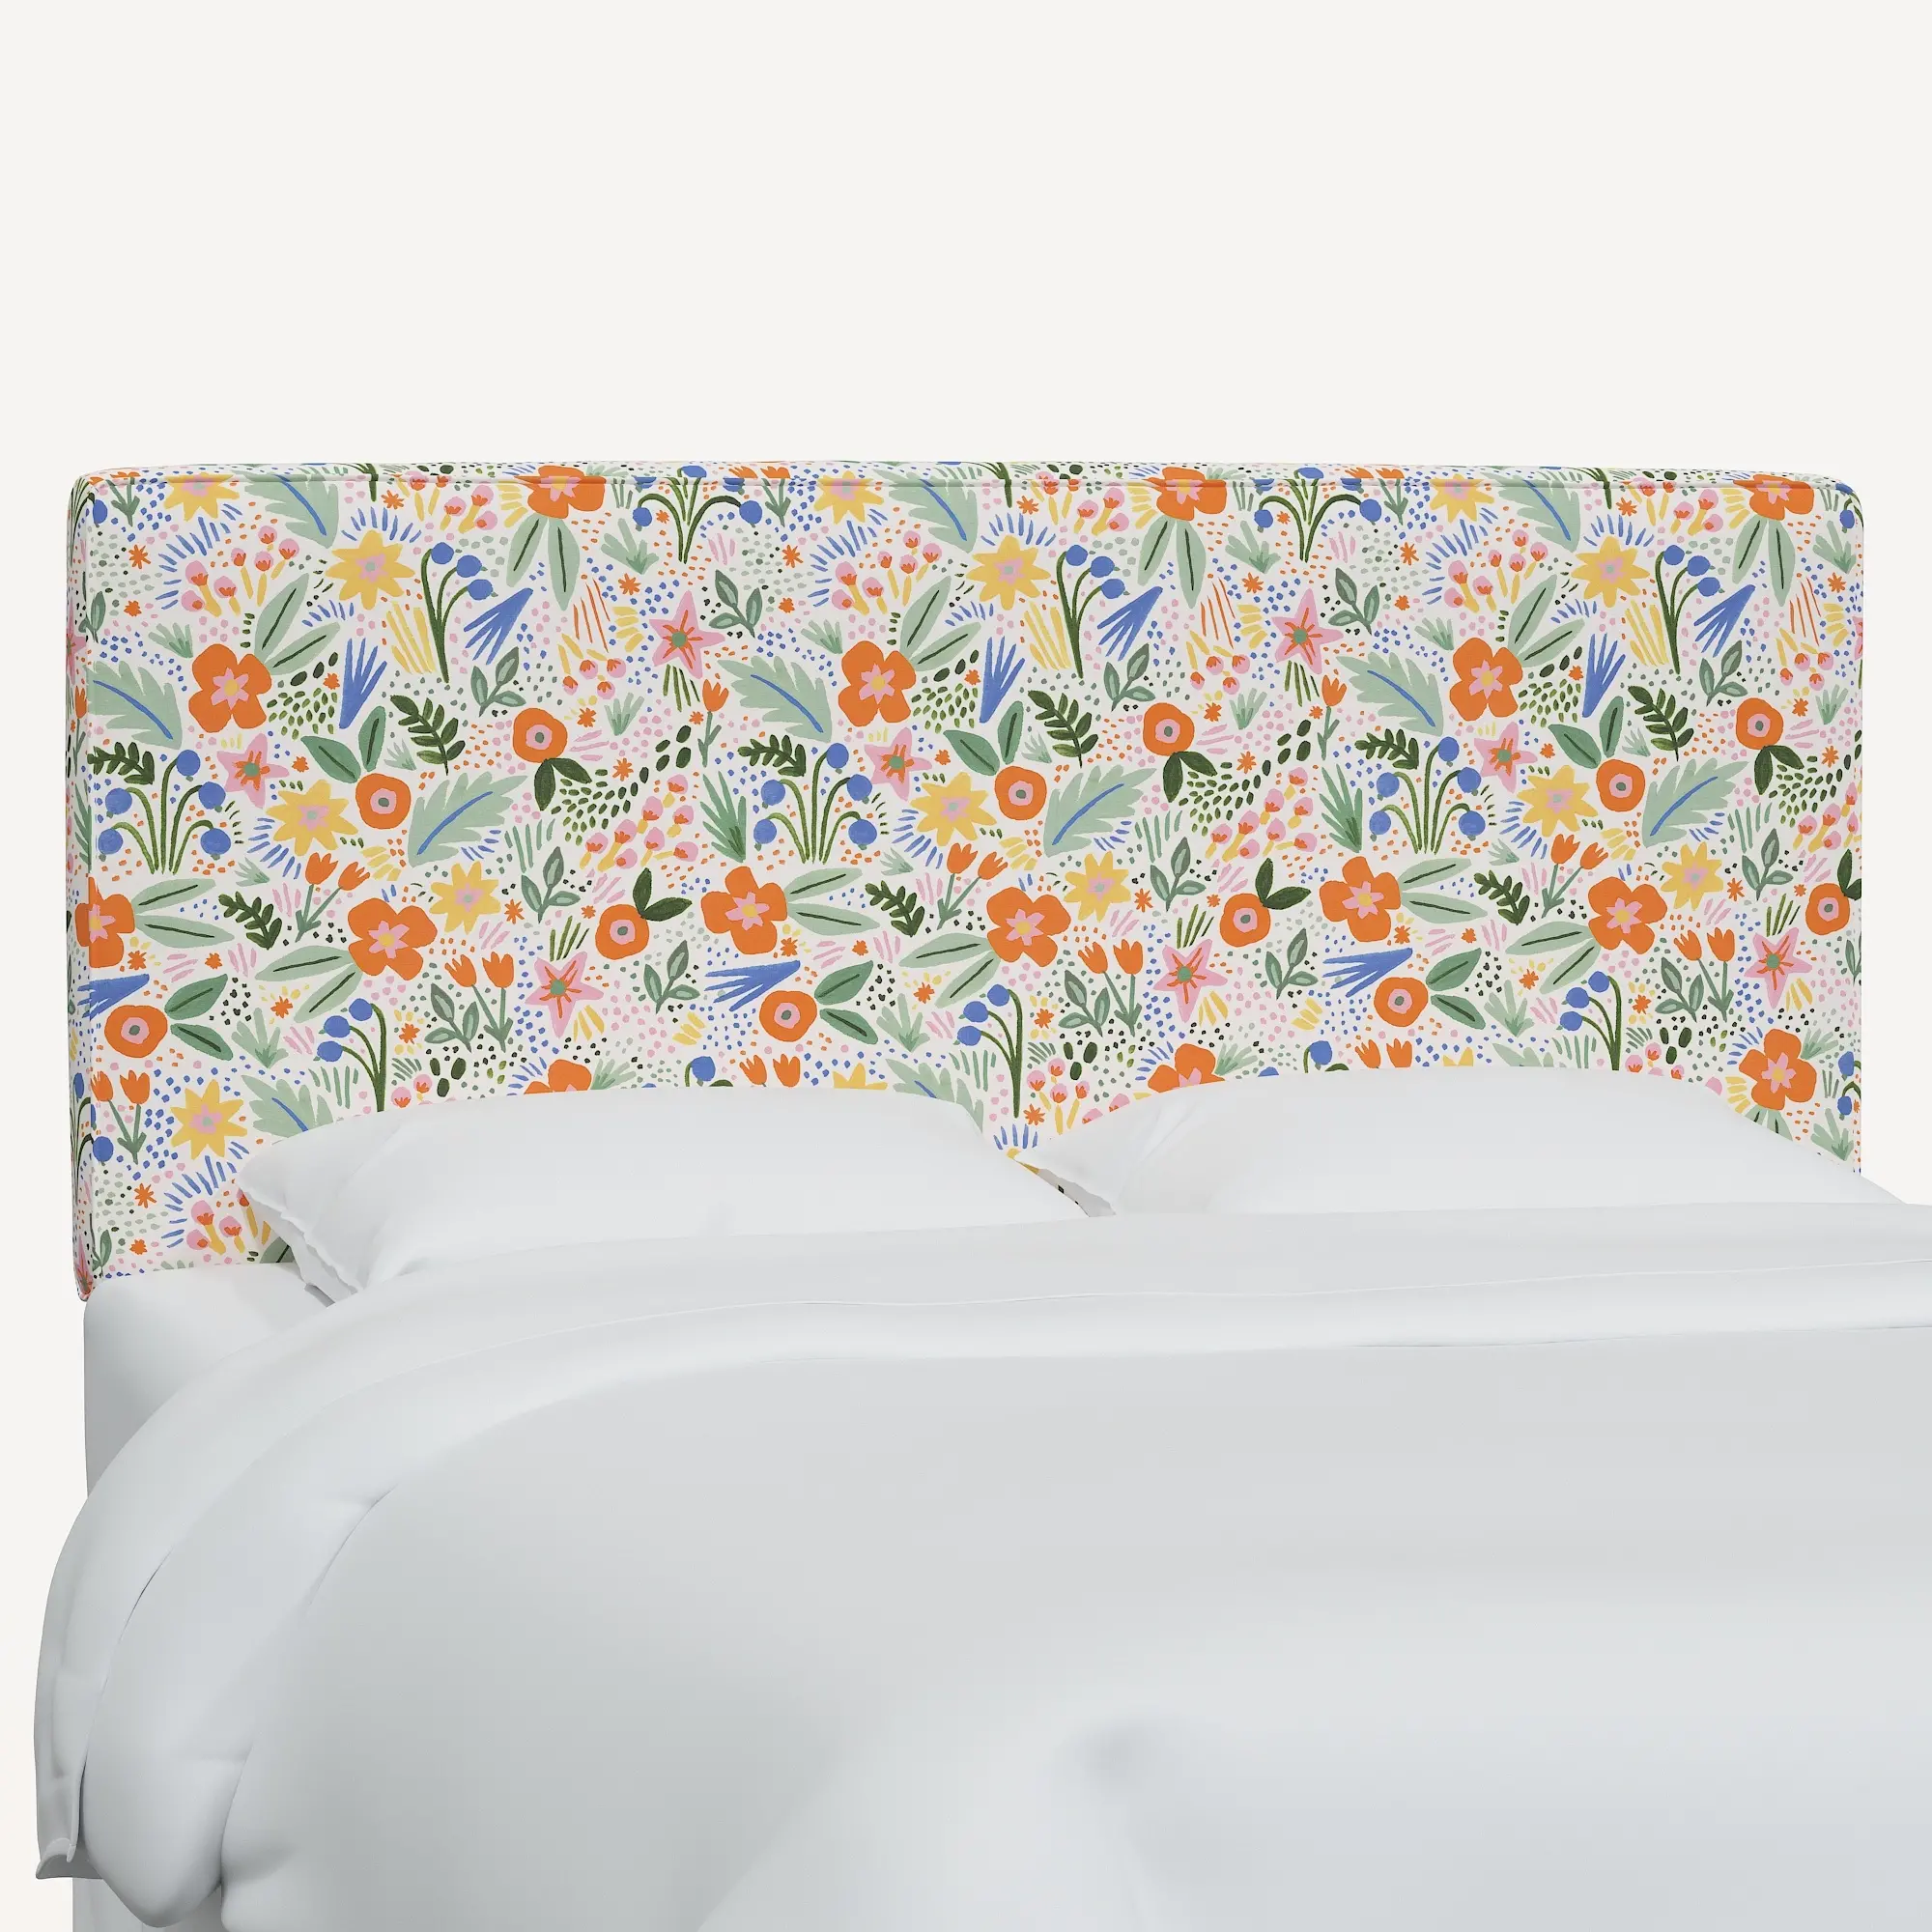 Rifle Paper Co Elly Multicolor Floral Full Headboard